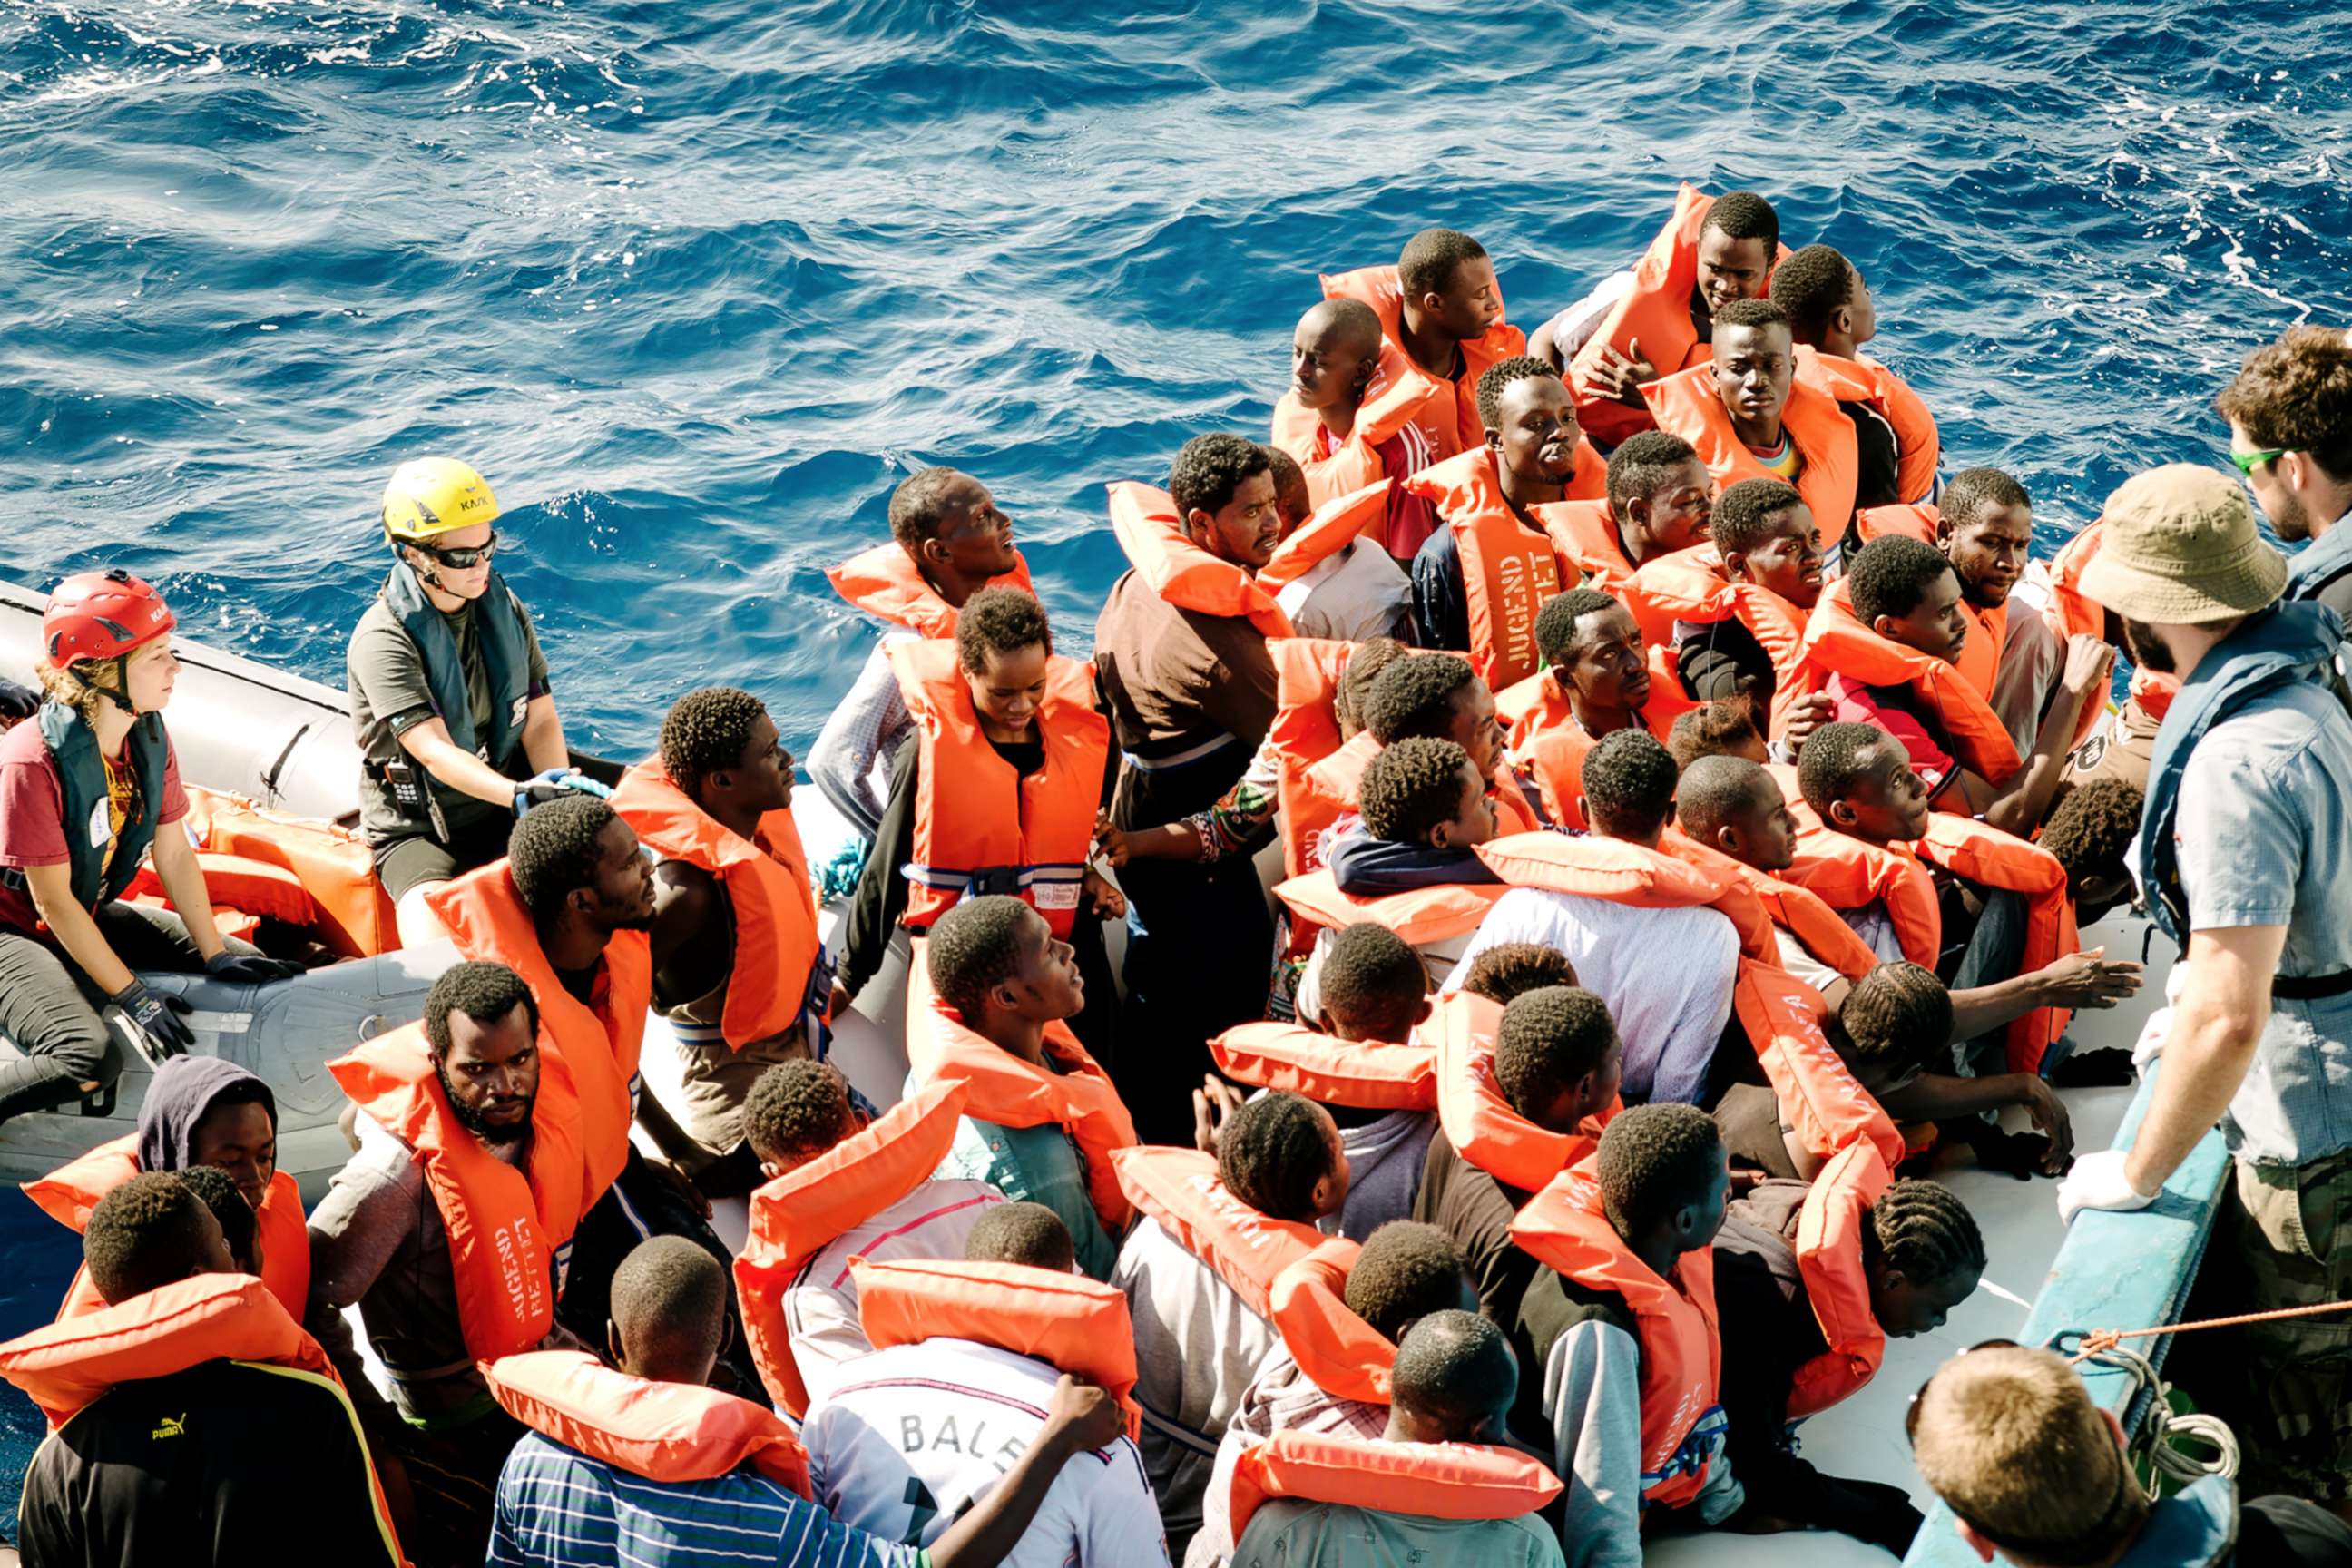 PHOTO: The Iuventa and its crew of volunteers rescued 14,000 people until it was seized by Italian authorities in 2017.